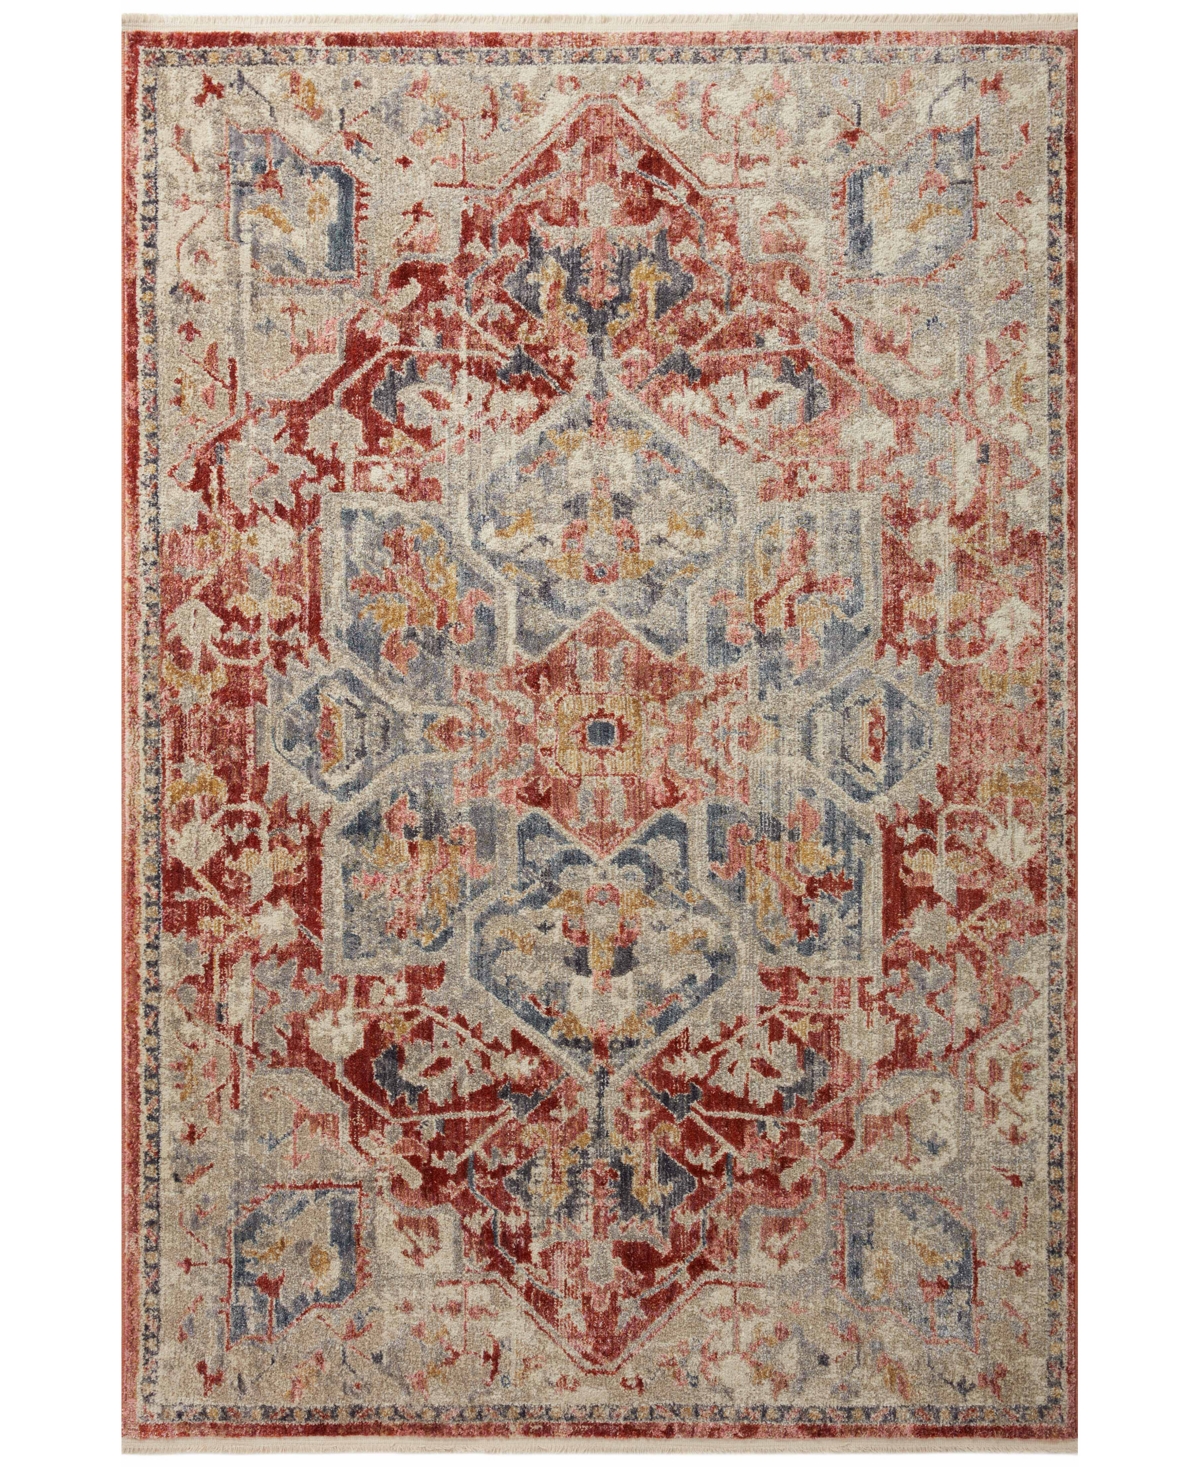 Magnolia Home By Joanna Gaines X Loloi Janey Jay-01 6'7" X 9'2" Area Rug In Maroon